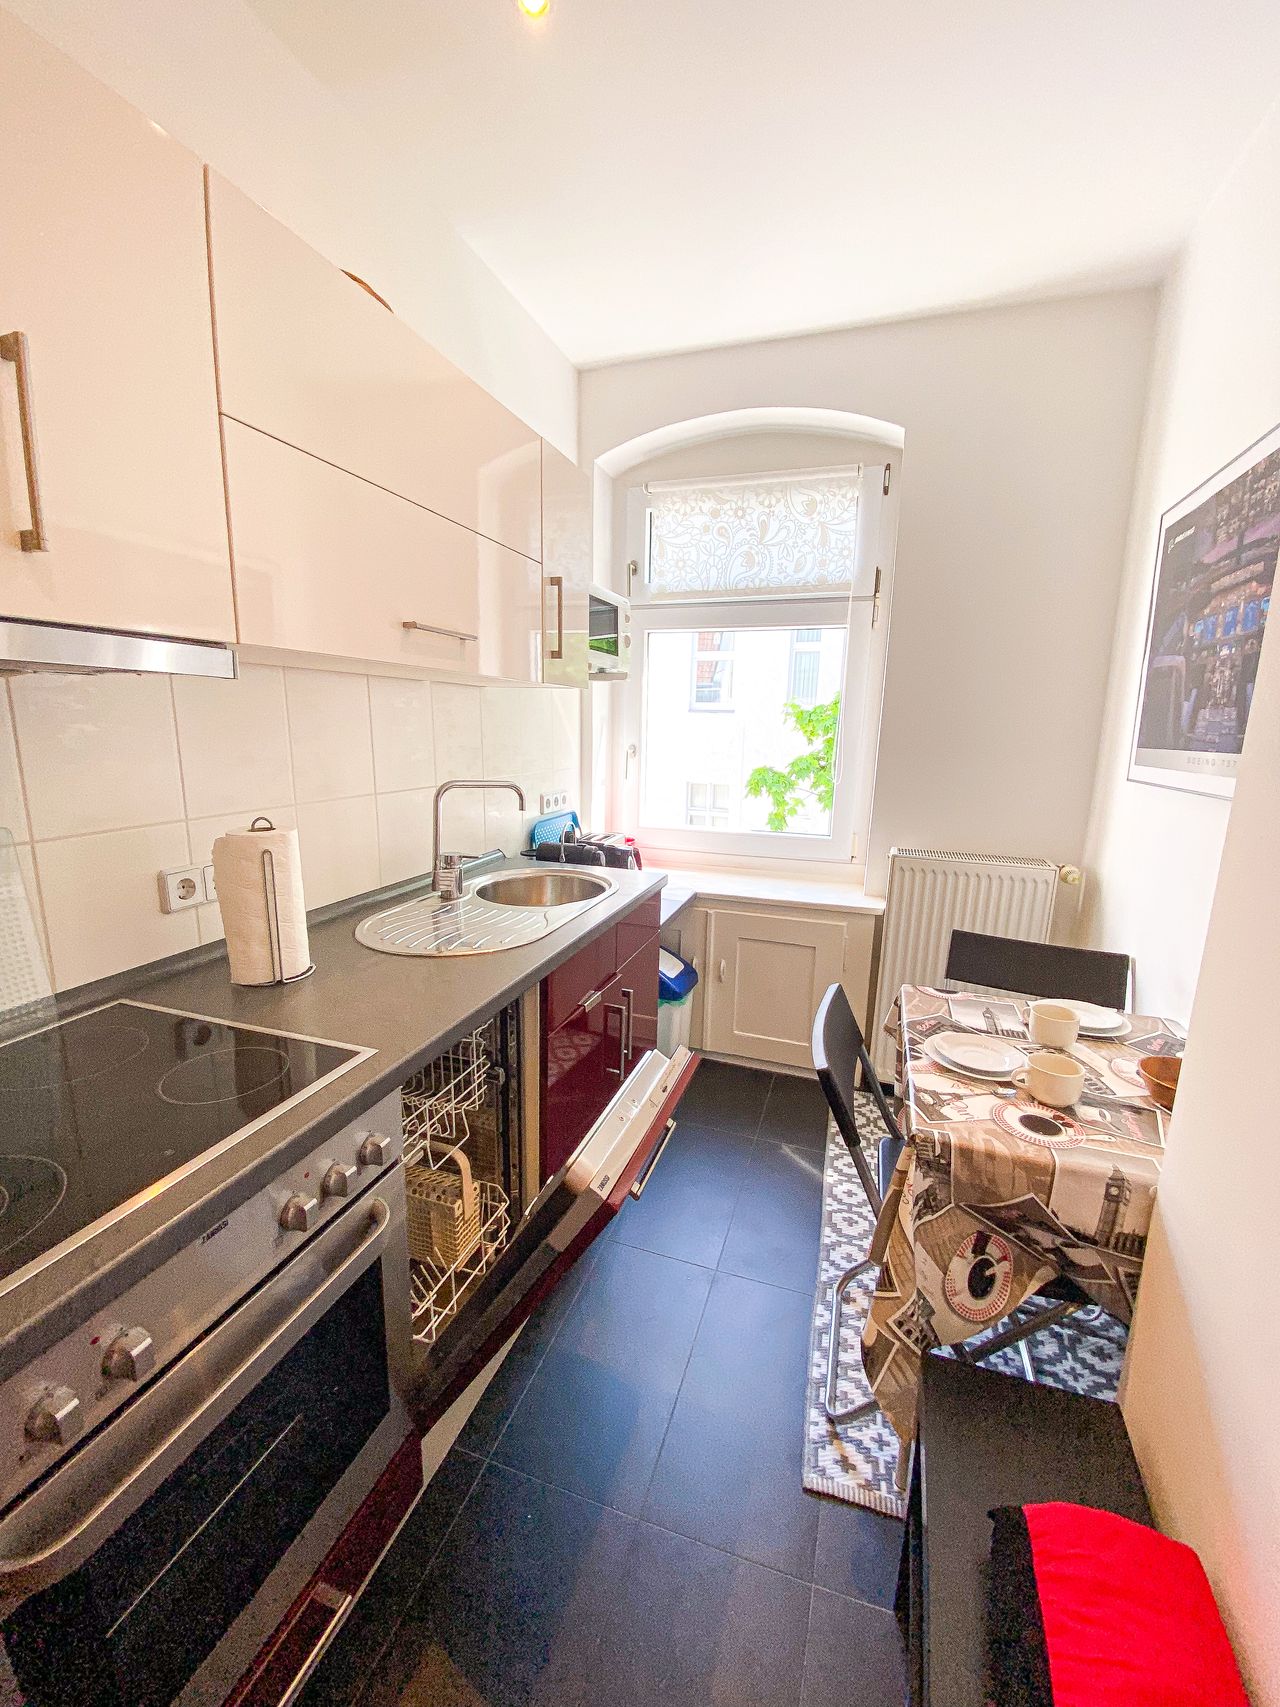 'Rieke' - beautiful and bright 2 room apartment in central location City-West